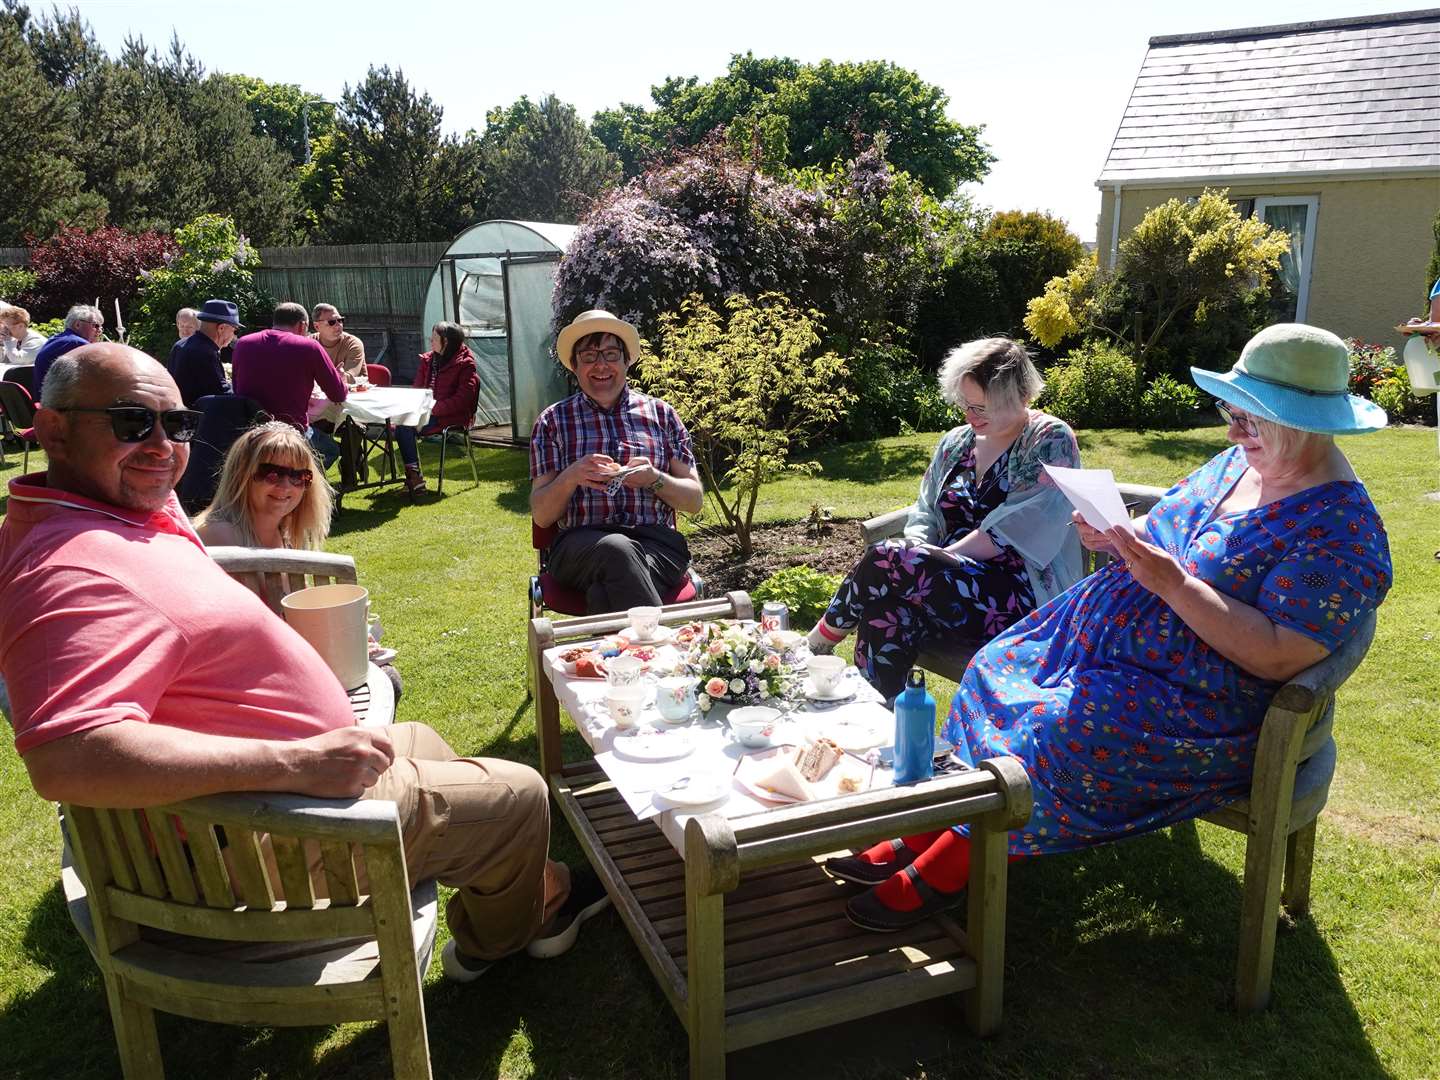 The warm weather added to the enjoyment of the afternoon tea.